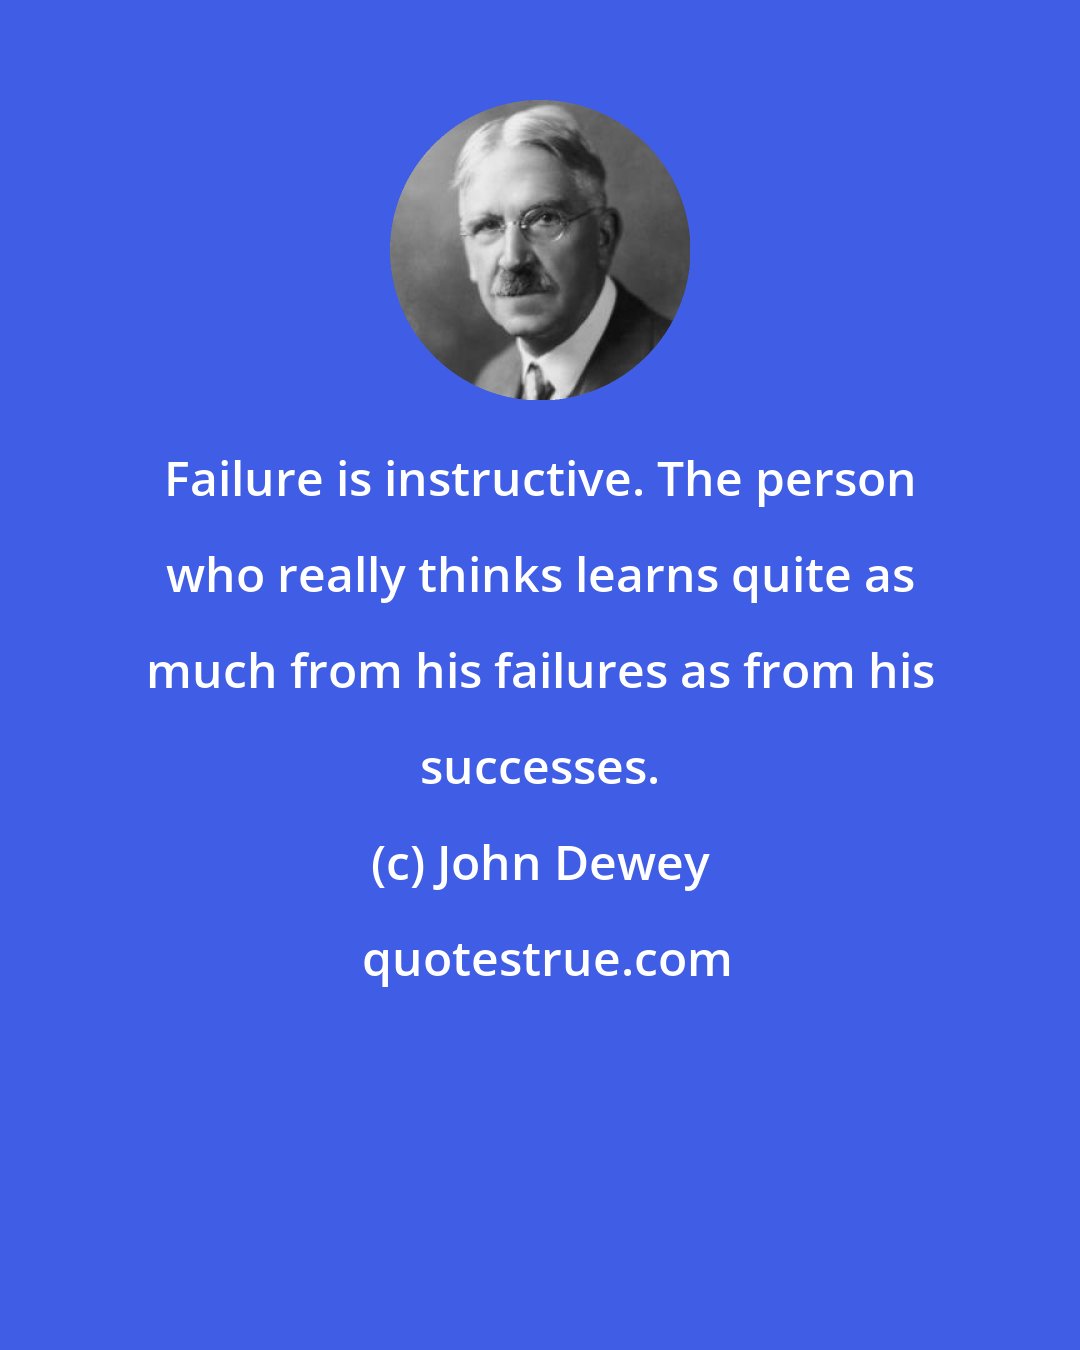 John Dewey: Failure is instructive. The person who really thinks learns quite as much from his failures as from his successes.